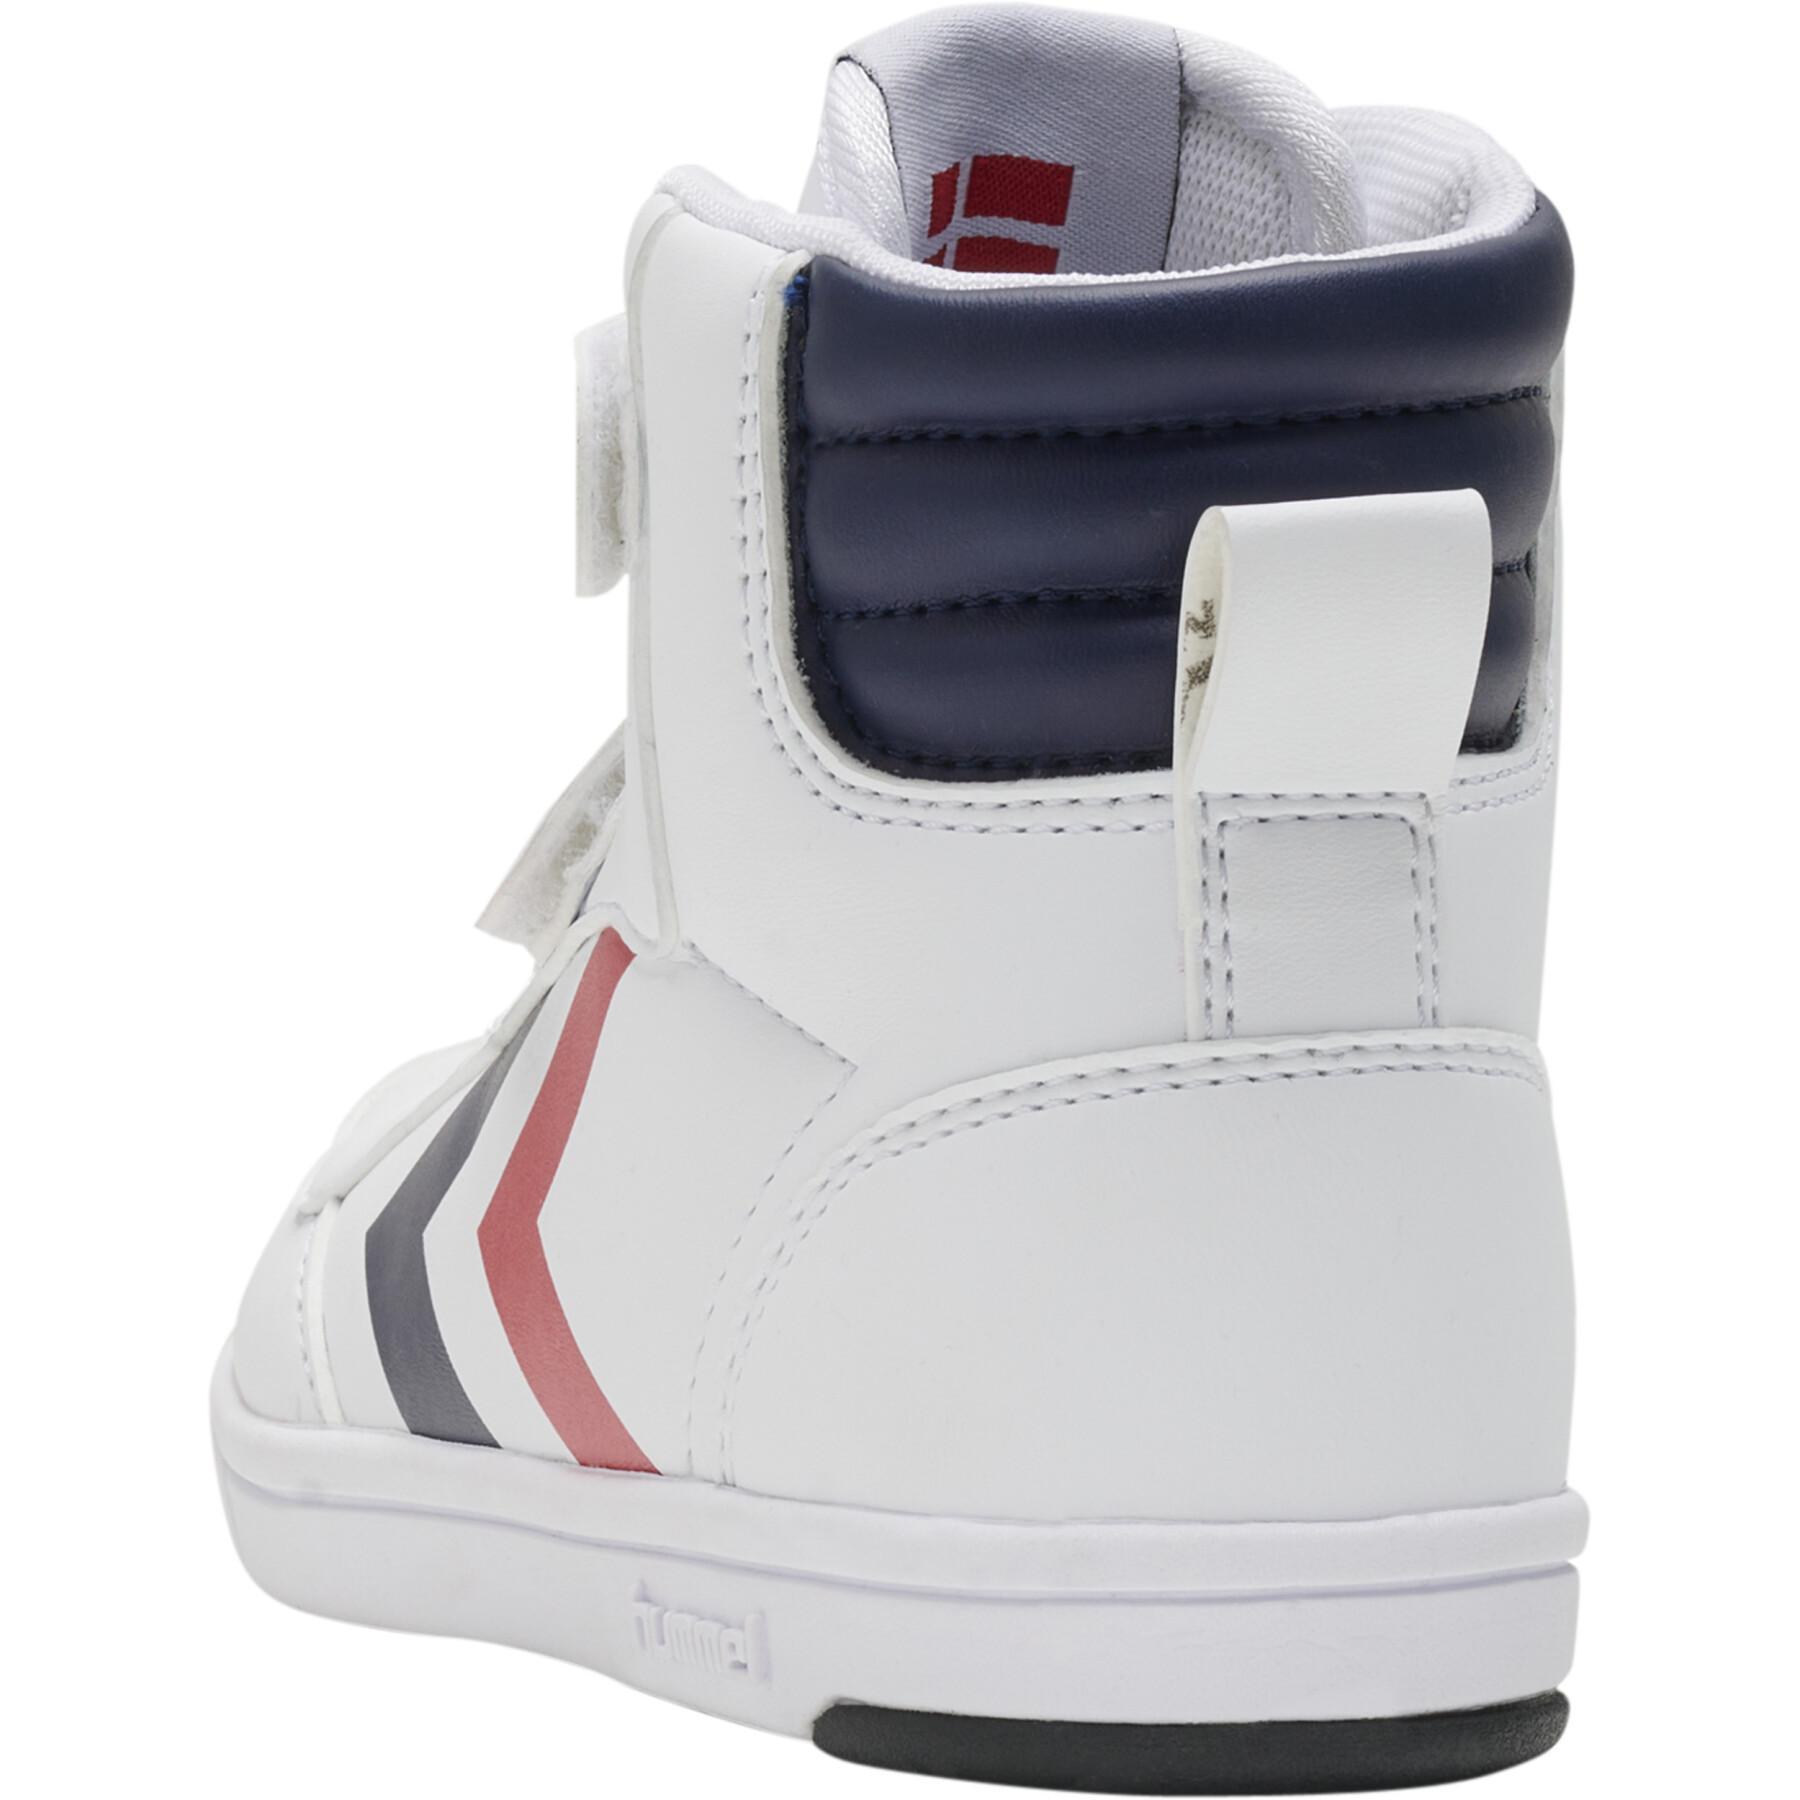 High top sneakers for kids Hummel Stadil Light Quick